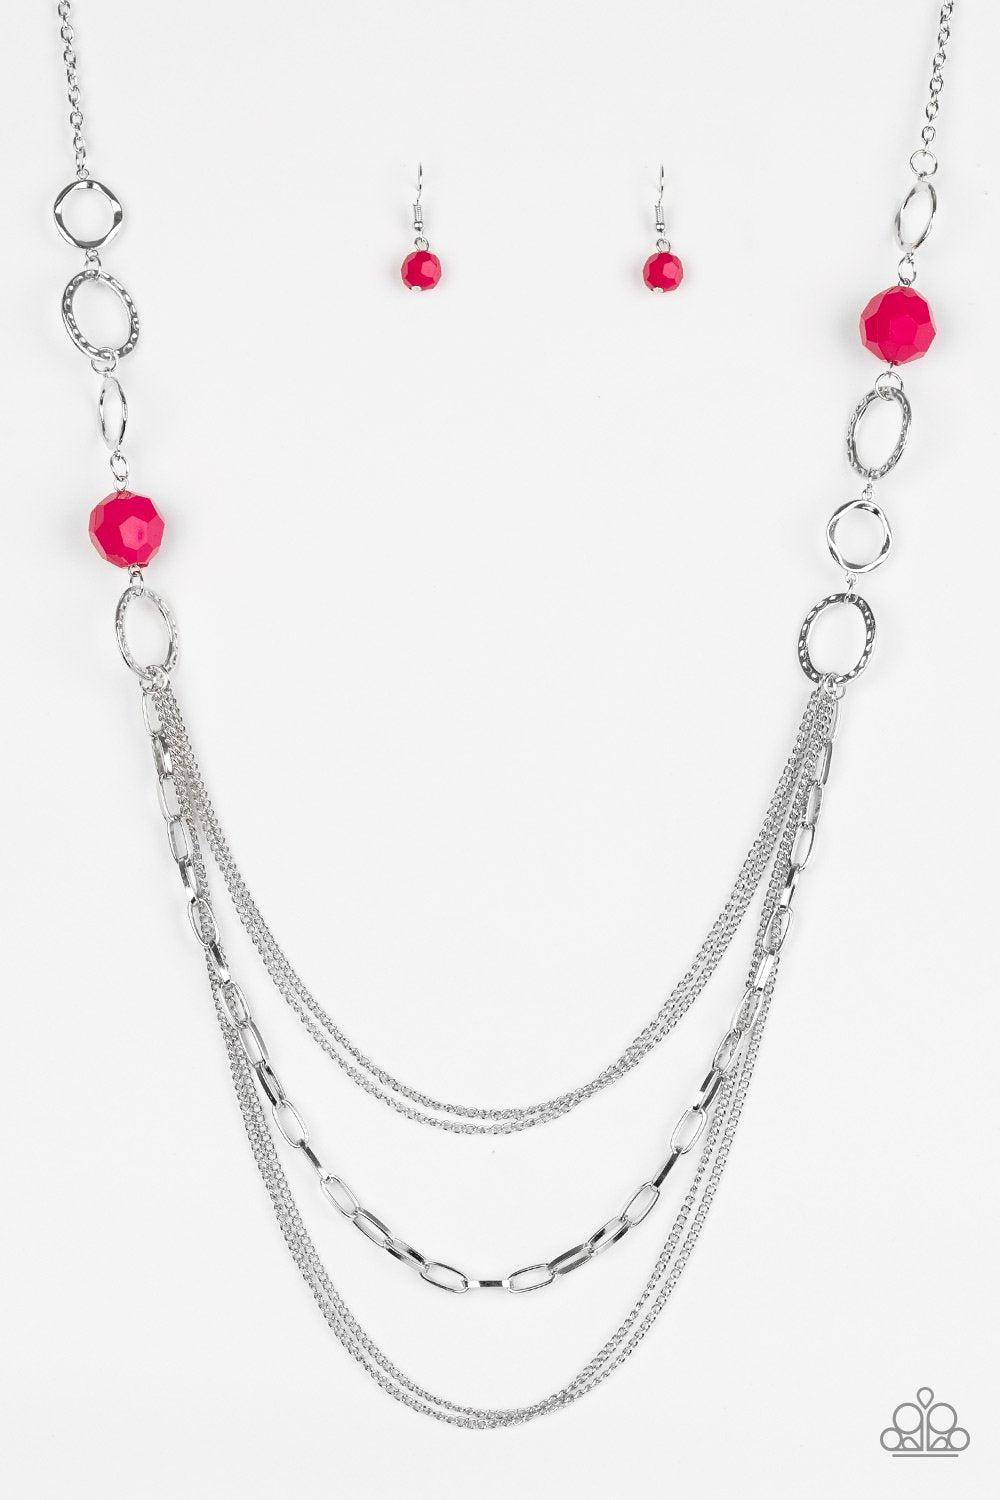 Margarita Masquerades Silver and Pink Necklace - Paparazzi Accessories-CarasShop.com - $5 Jewelry by Cara Jewels